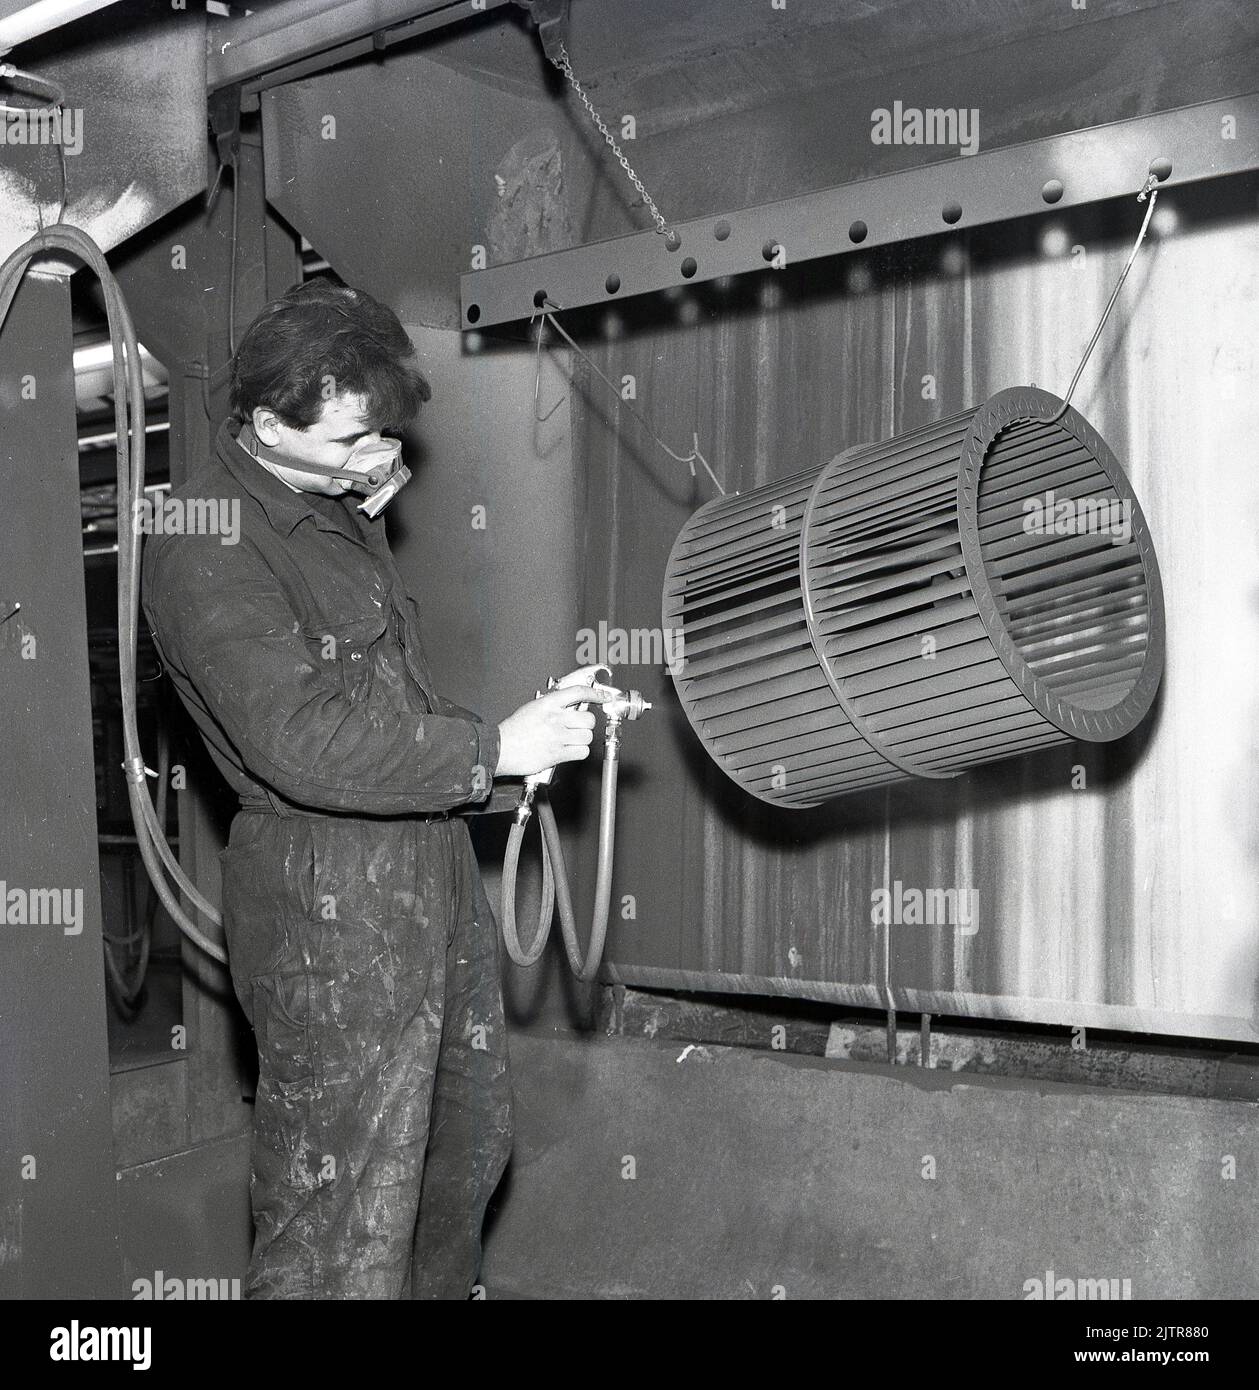 1960s, historical, a worker in overalls and nose & mouth mask using an electric spray gun to coat a metal see-thru cylinder, an industrial part, hanging in an enclosure. Stock Photo